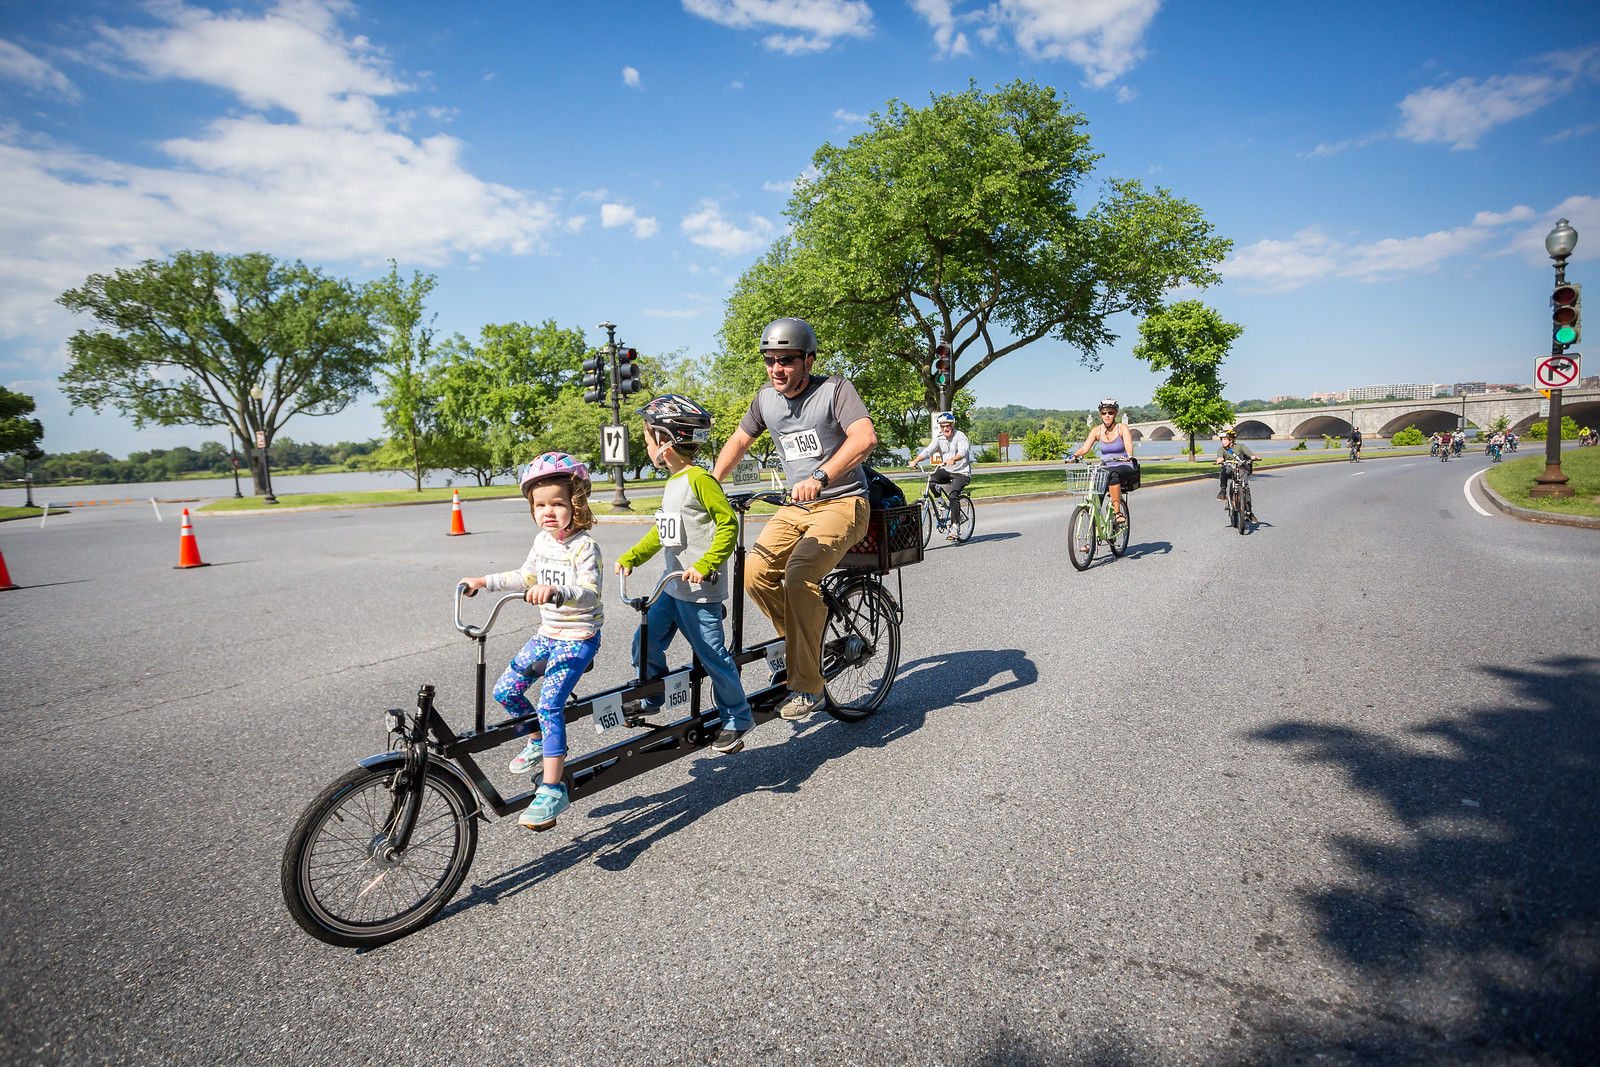 For a few hours on May 19, 20 miles of the District’s most scenic roads will be closed to cars and open to bicyclists for the third annual DC Bike Ride. (Abram Eric Landes/Courtesy DC Bike Ride)